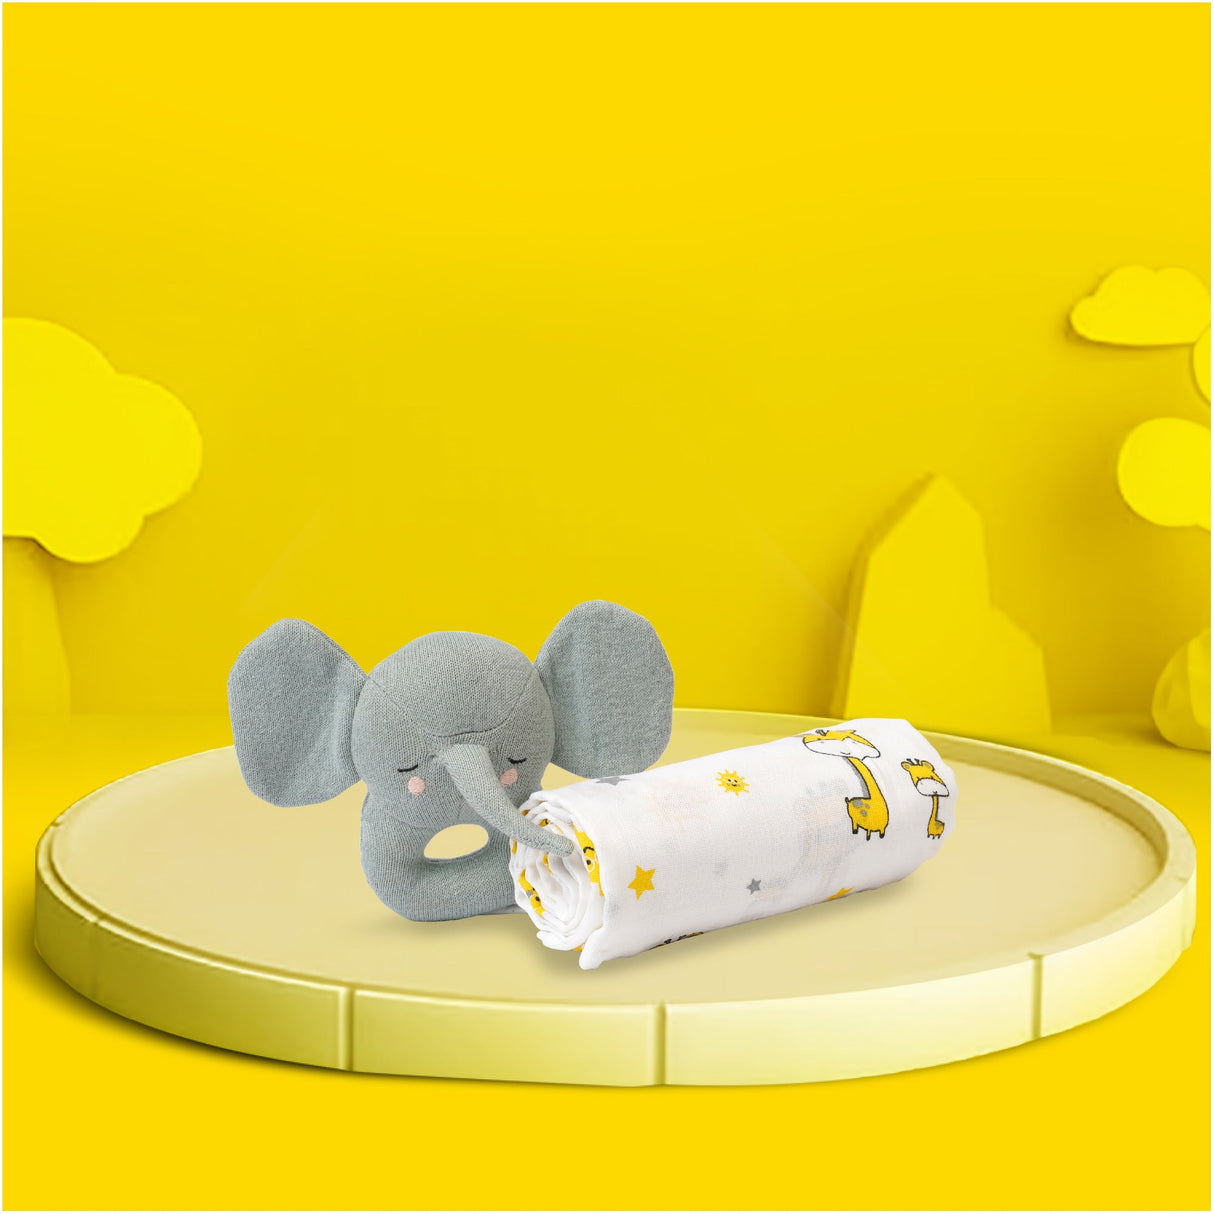 New Baby Gift set - Baby Swaddle and Rattle Gift Set